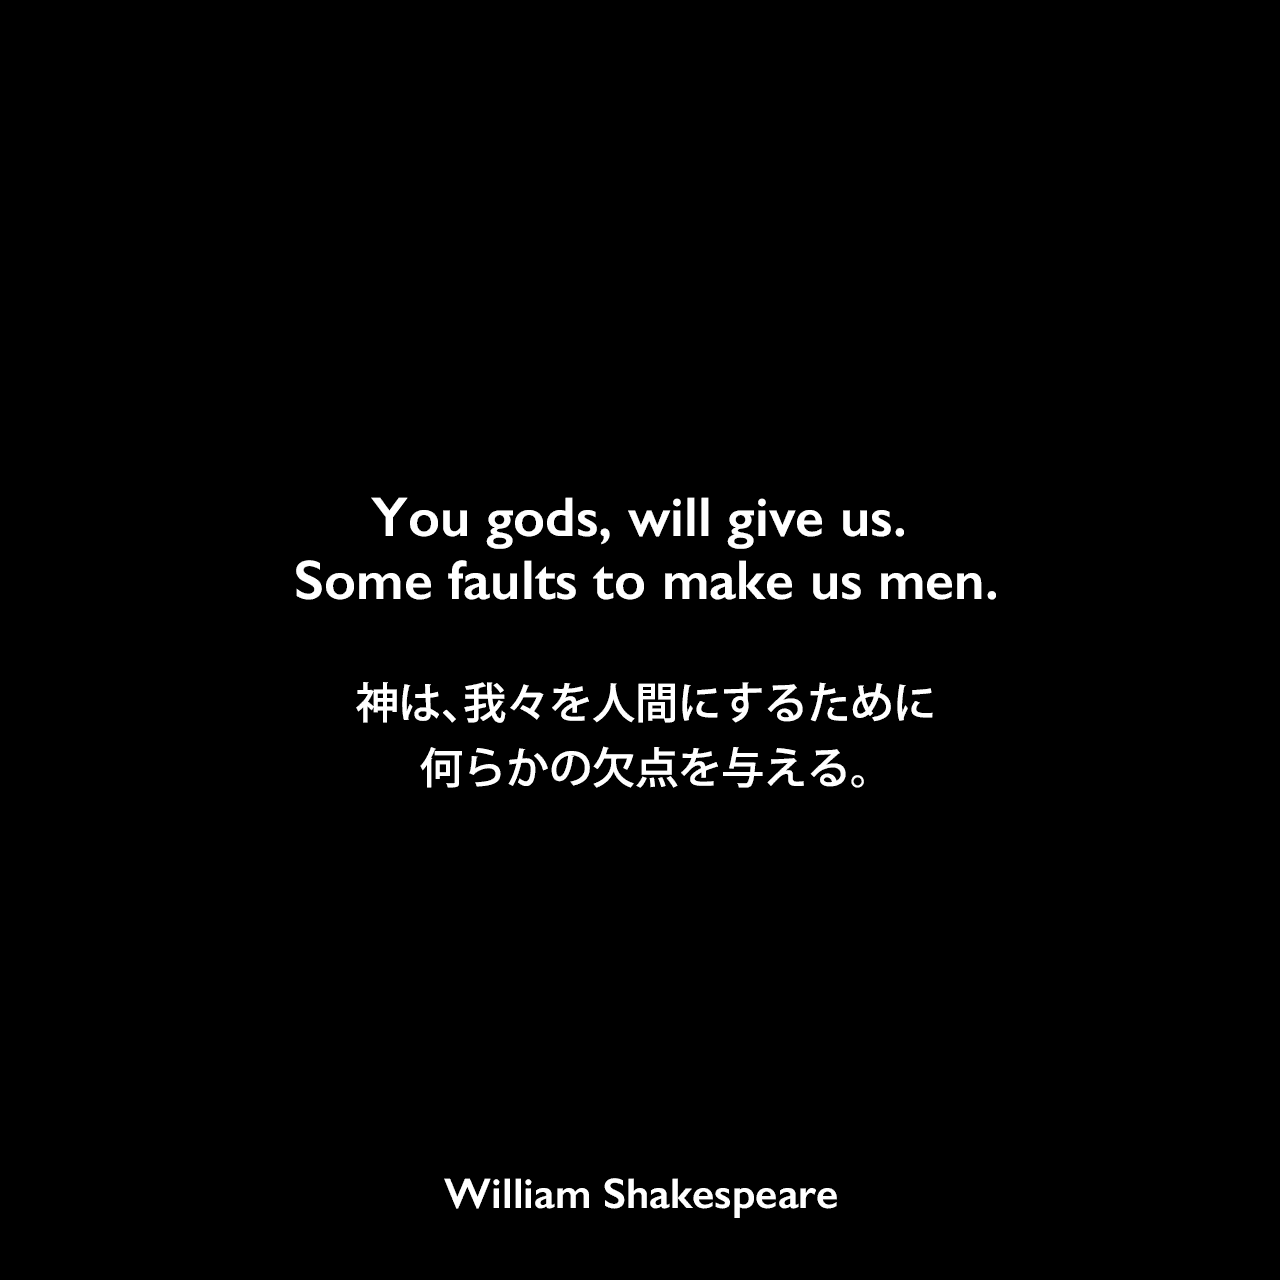 You gods, will give us. Some faults to make us men.神は、我々を人間にするために、何らかの欠点を与える。William Shakespeare